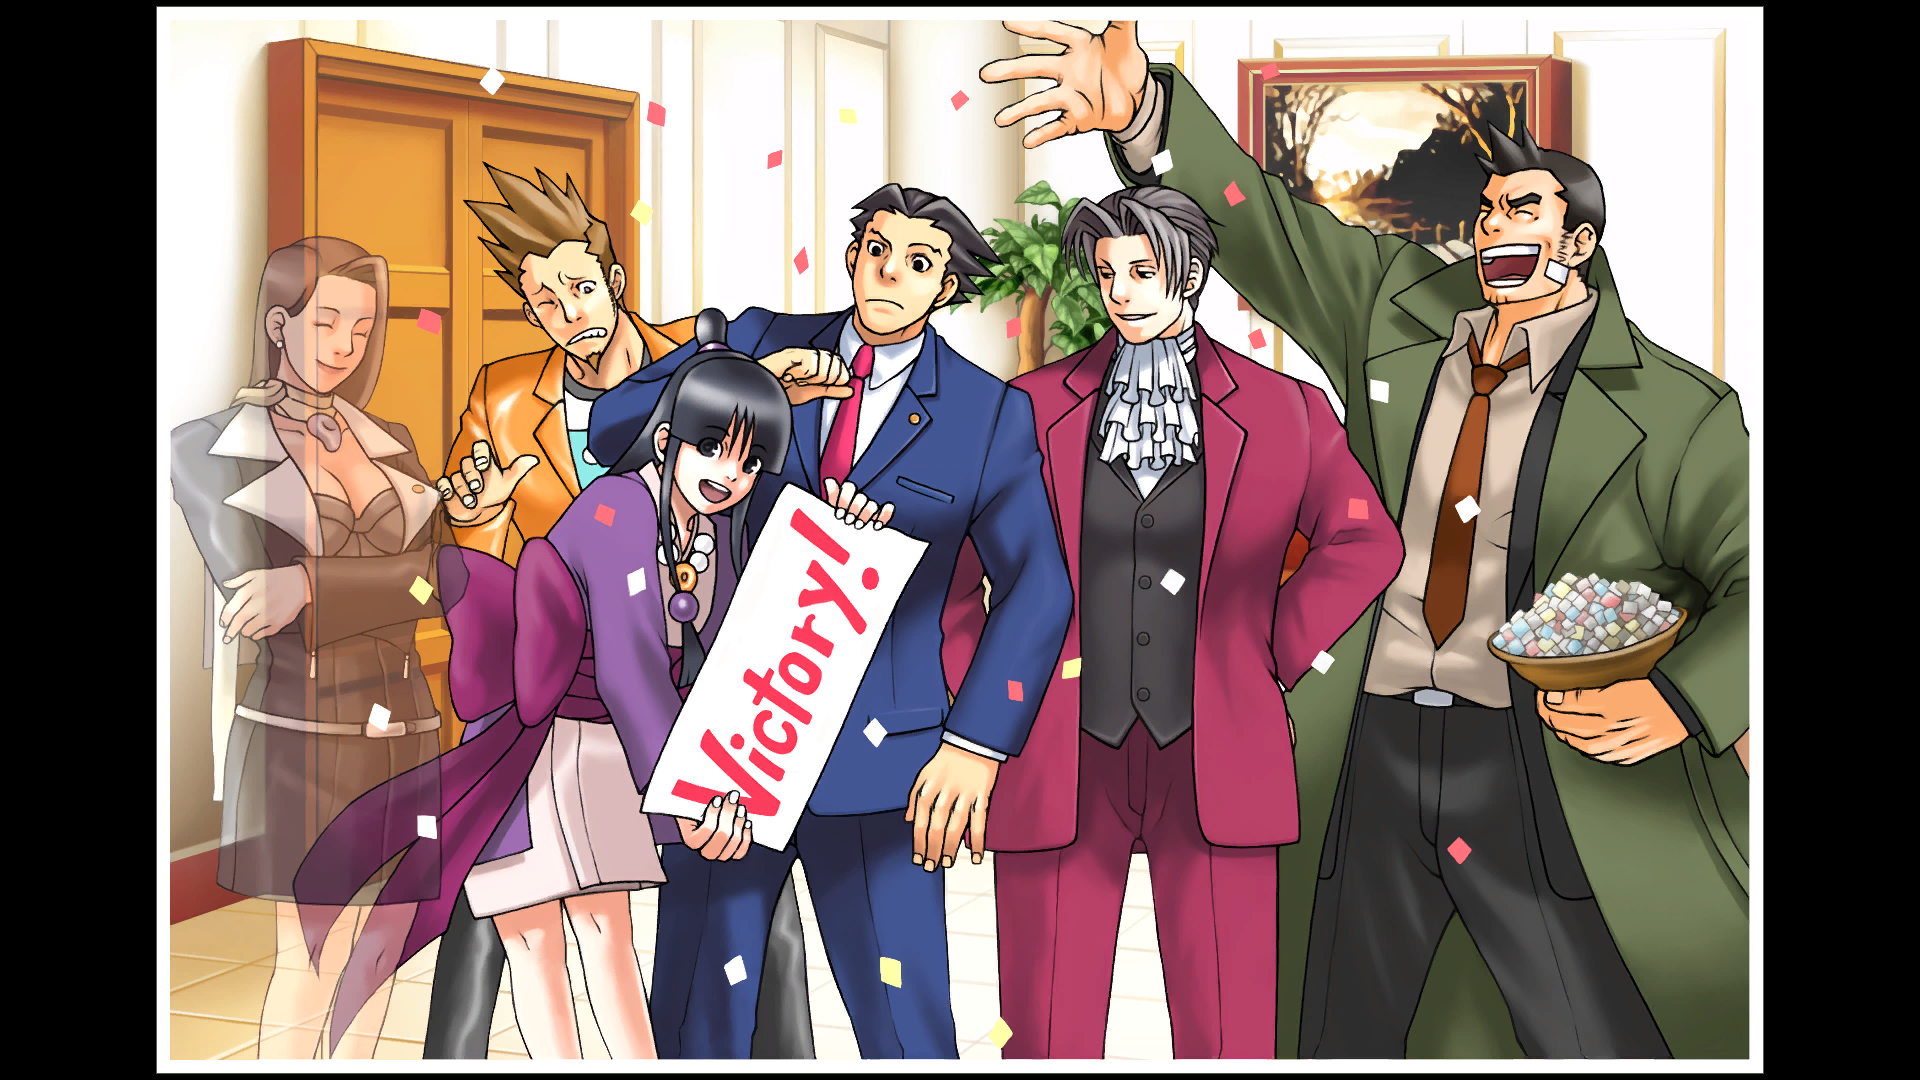 hehehe, hey Lois, remember the time Ace Attorney Phoenix Wright